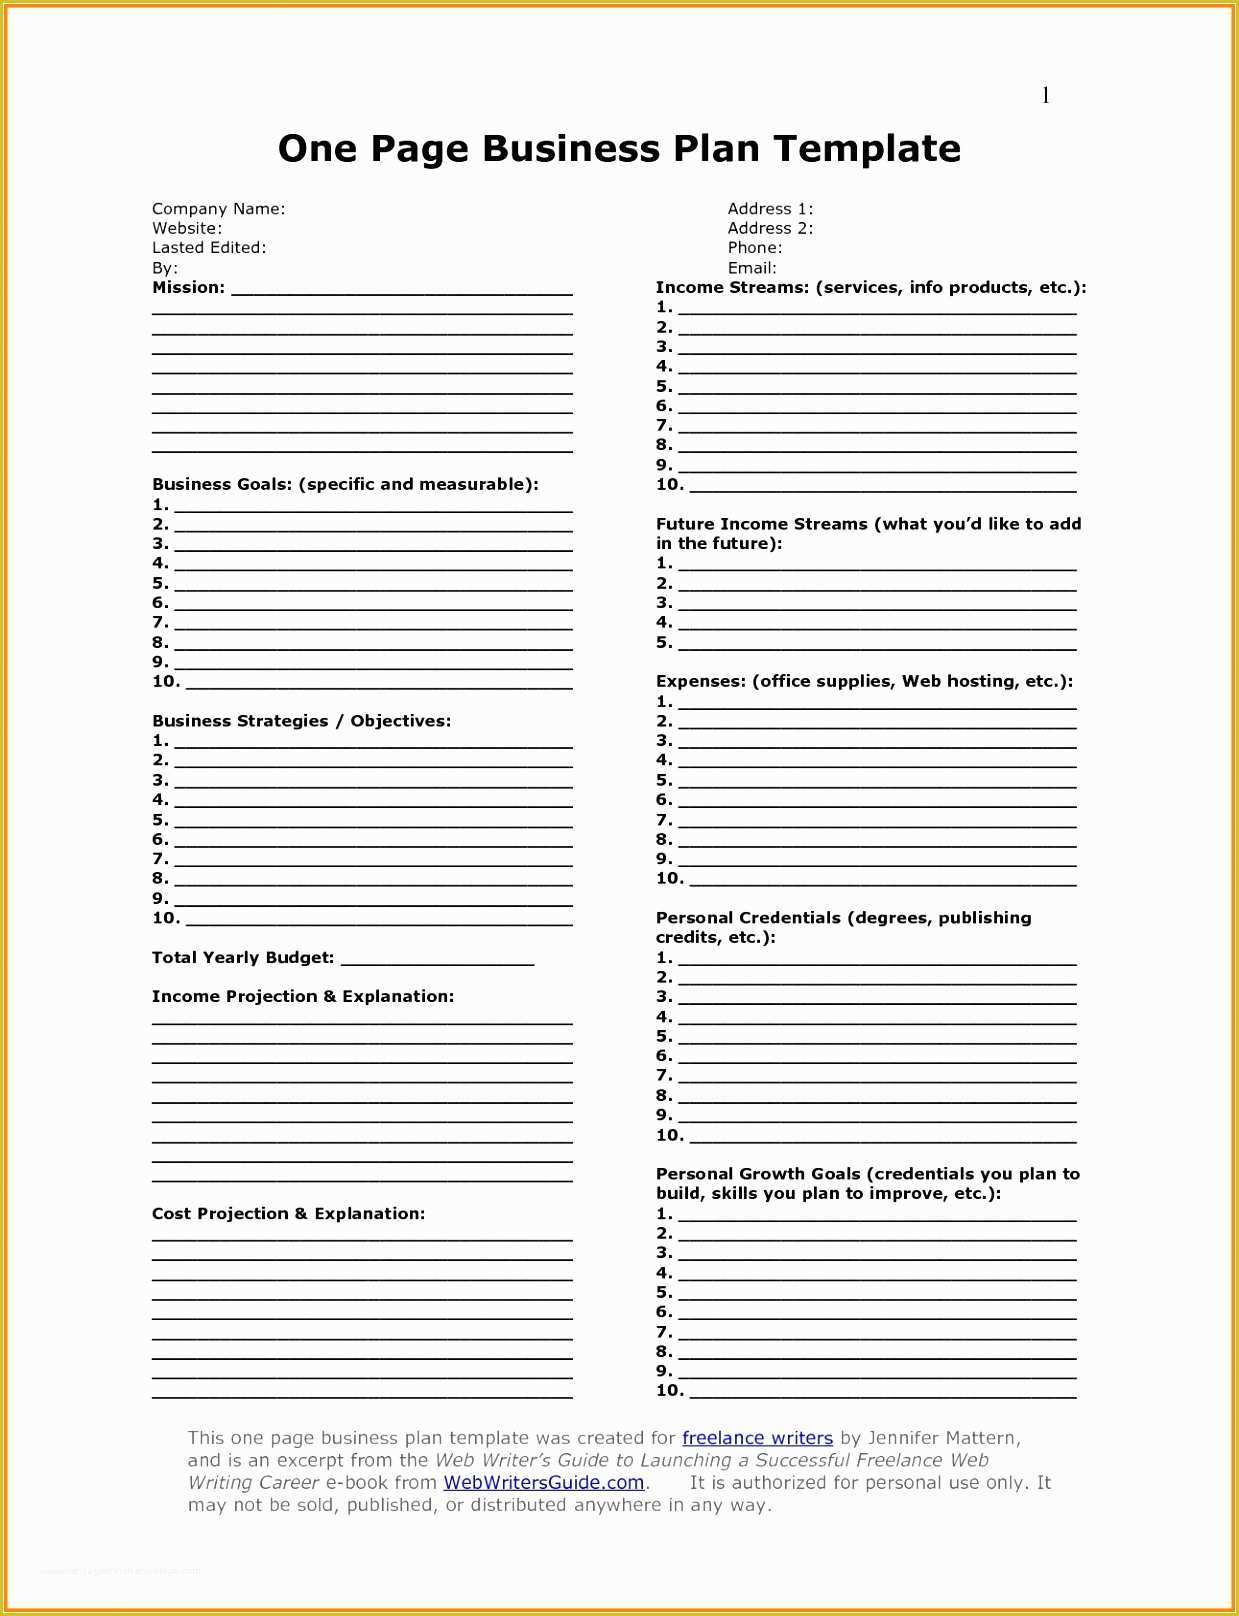 Short Business Plan Template Free Of 9 Free Business Plan Template for Small Business Uk Rtyio